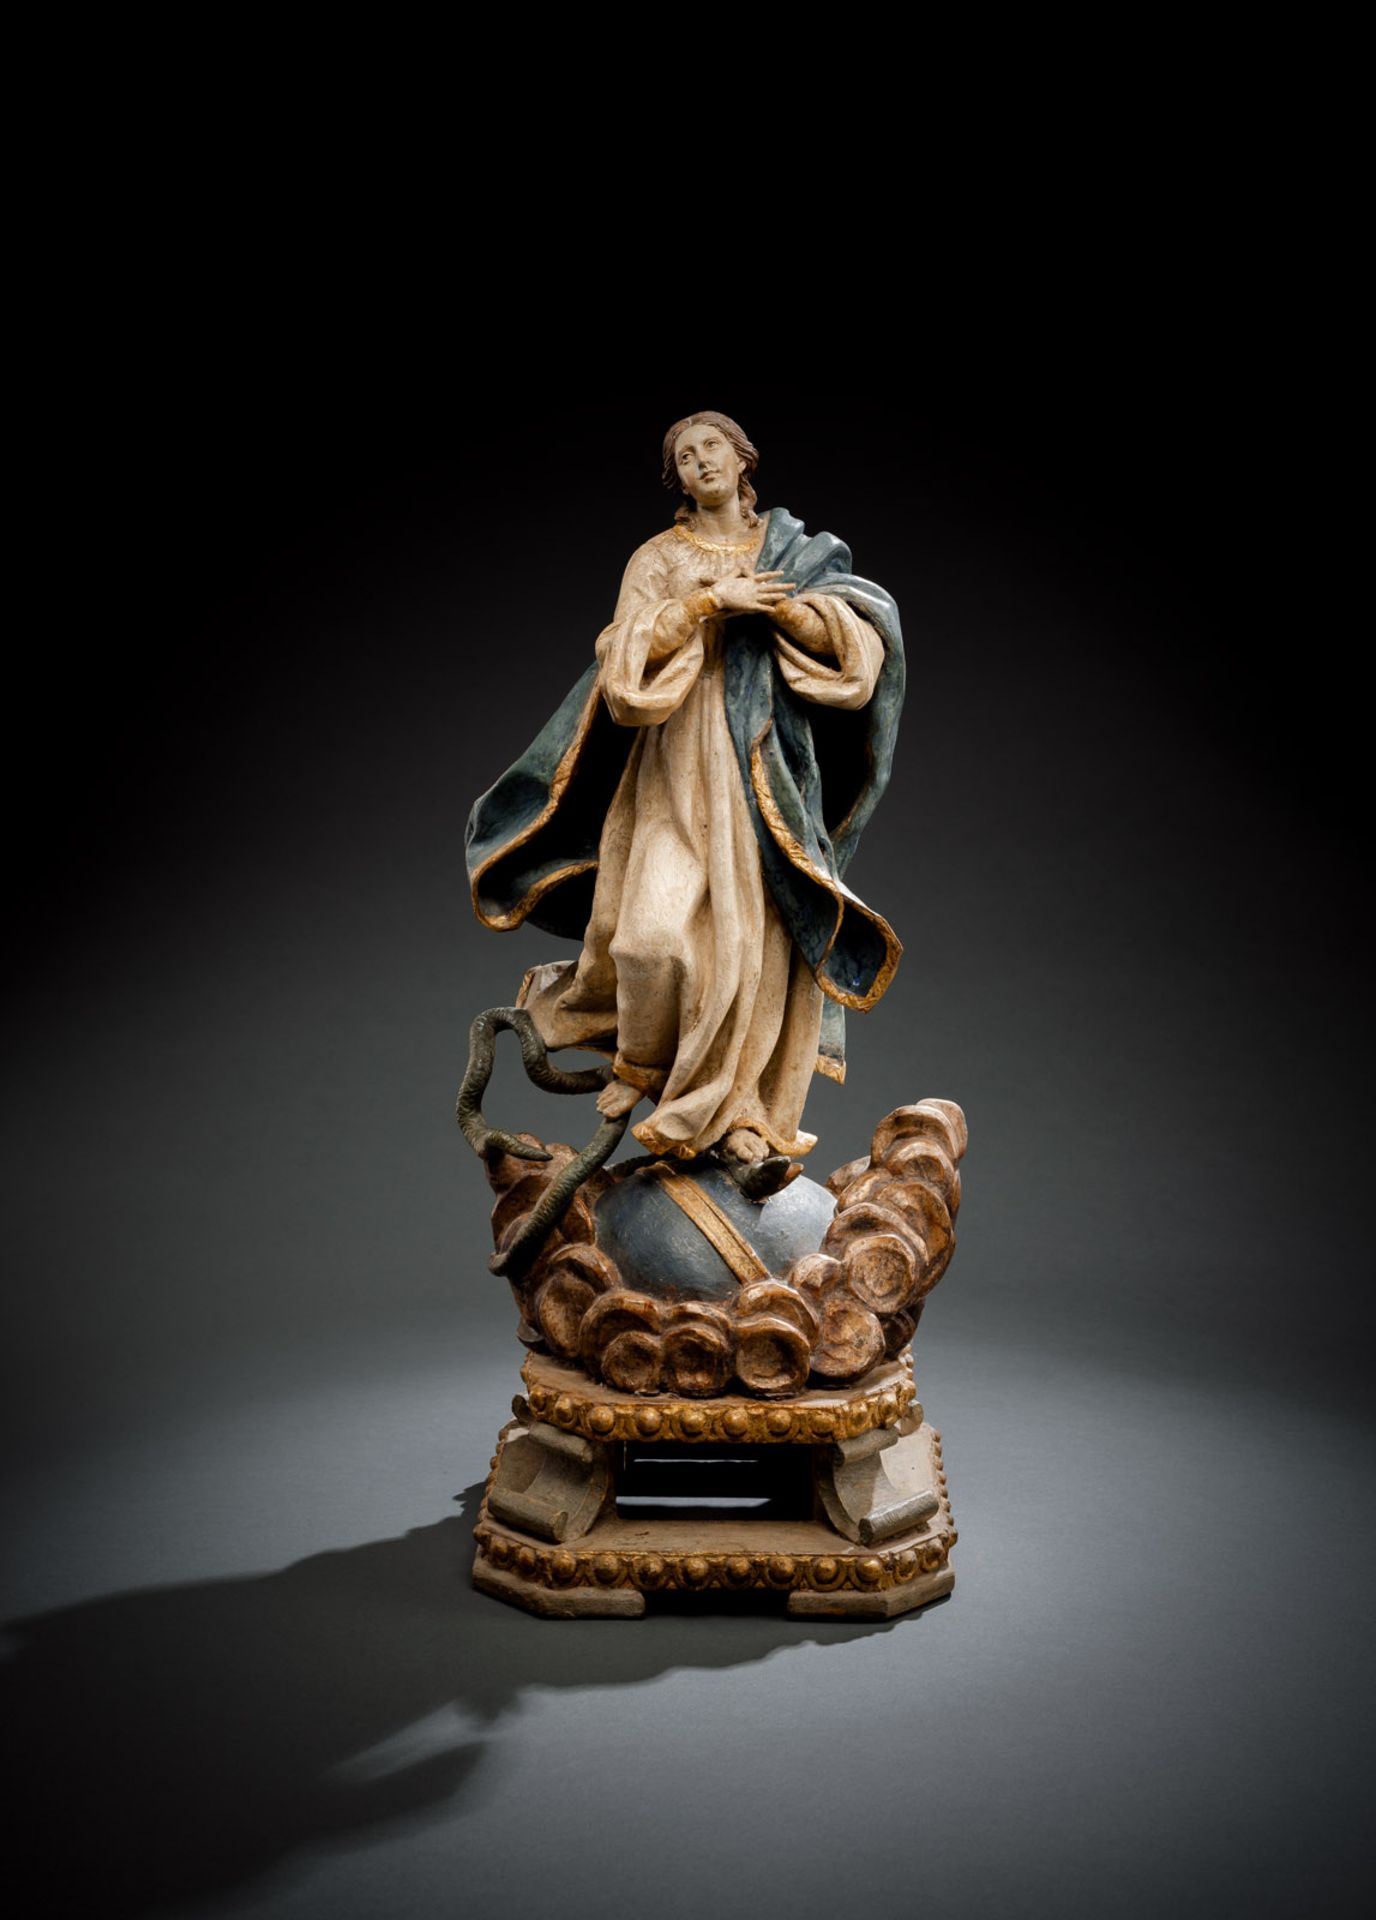 A FINE BAROQUE SCULPTURE OF ST. MARY IMMACULATE